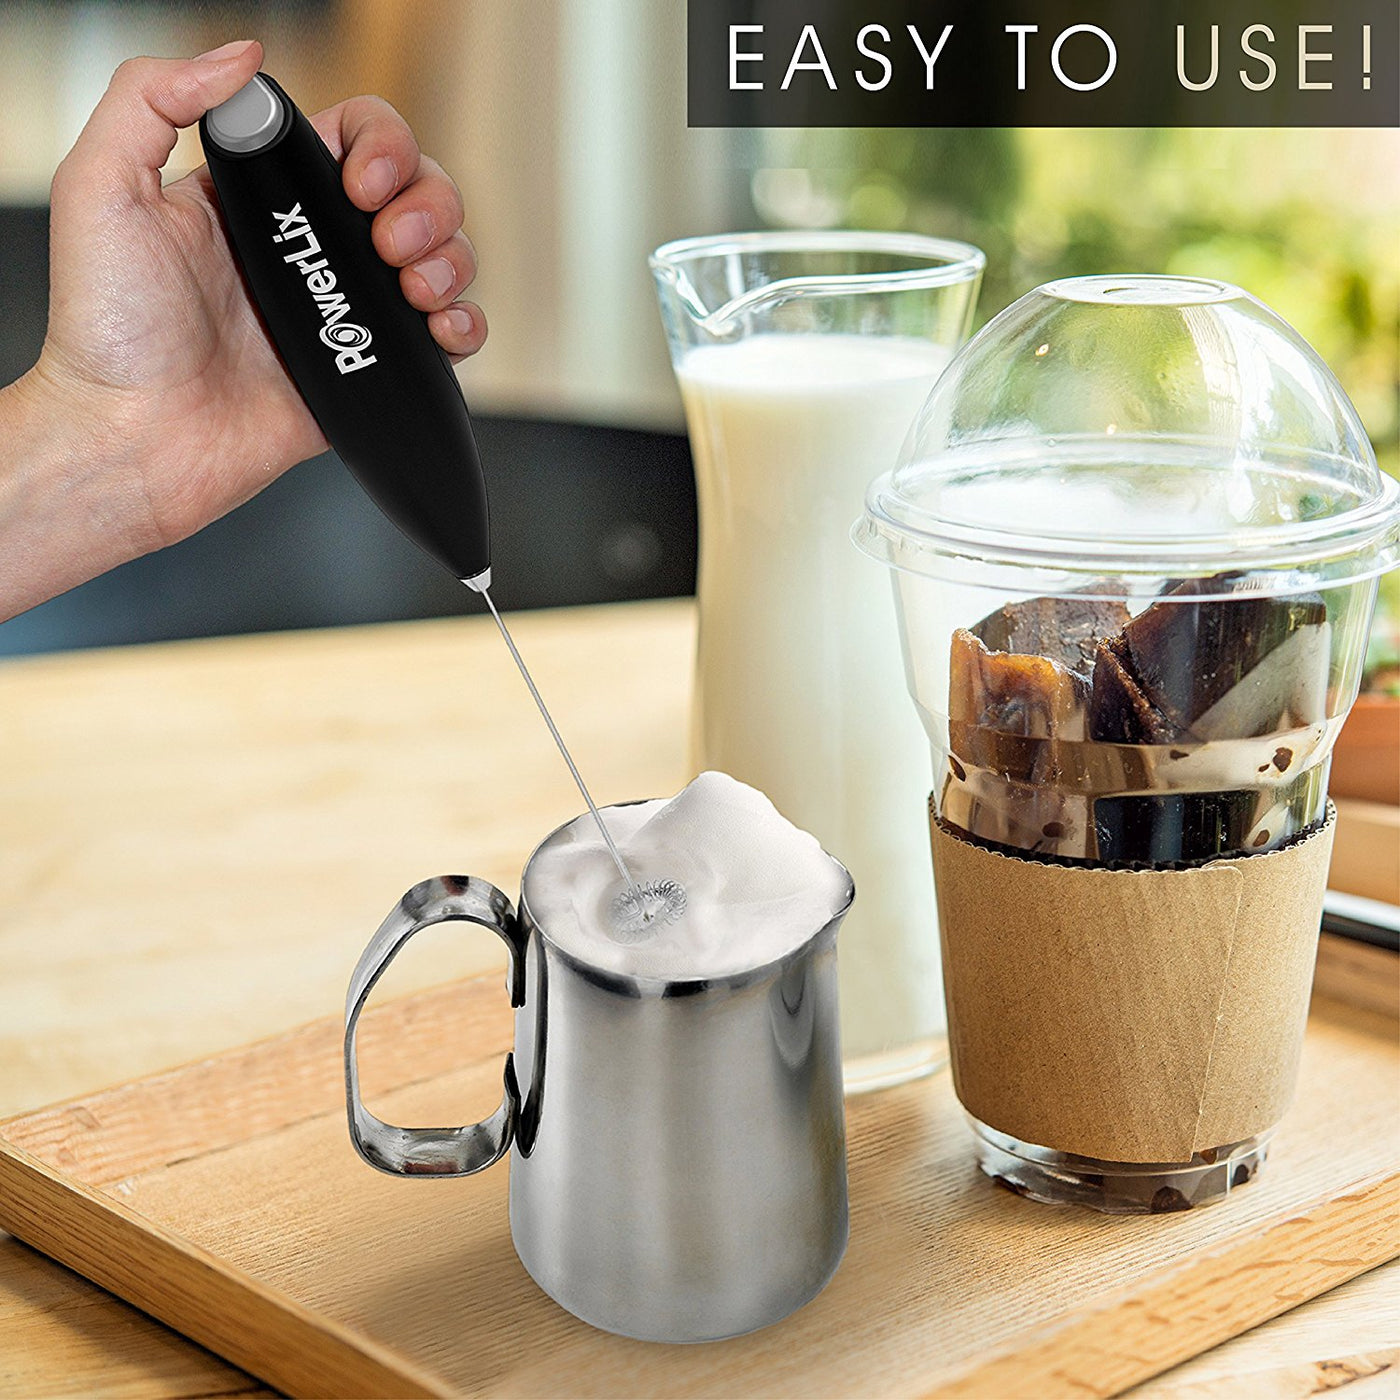 PowerLix Milk Frother, One Size - Foods Co.